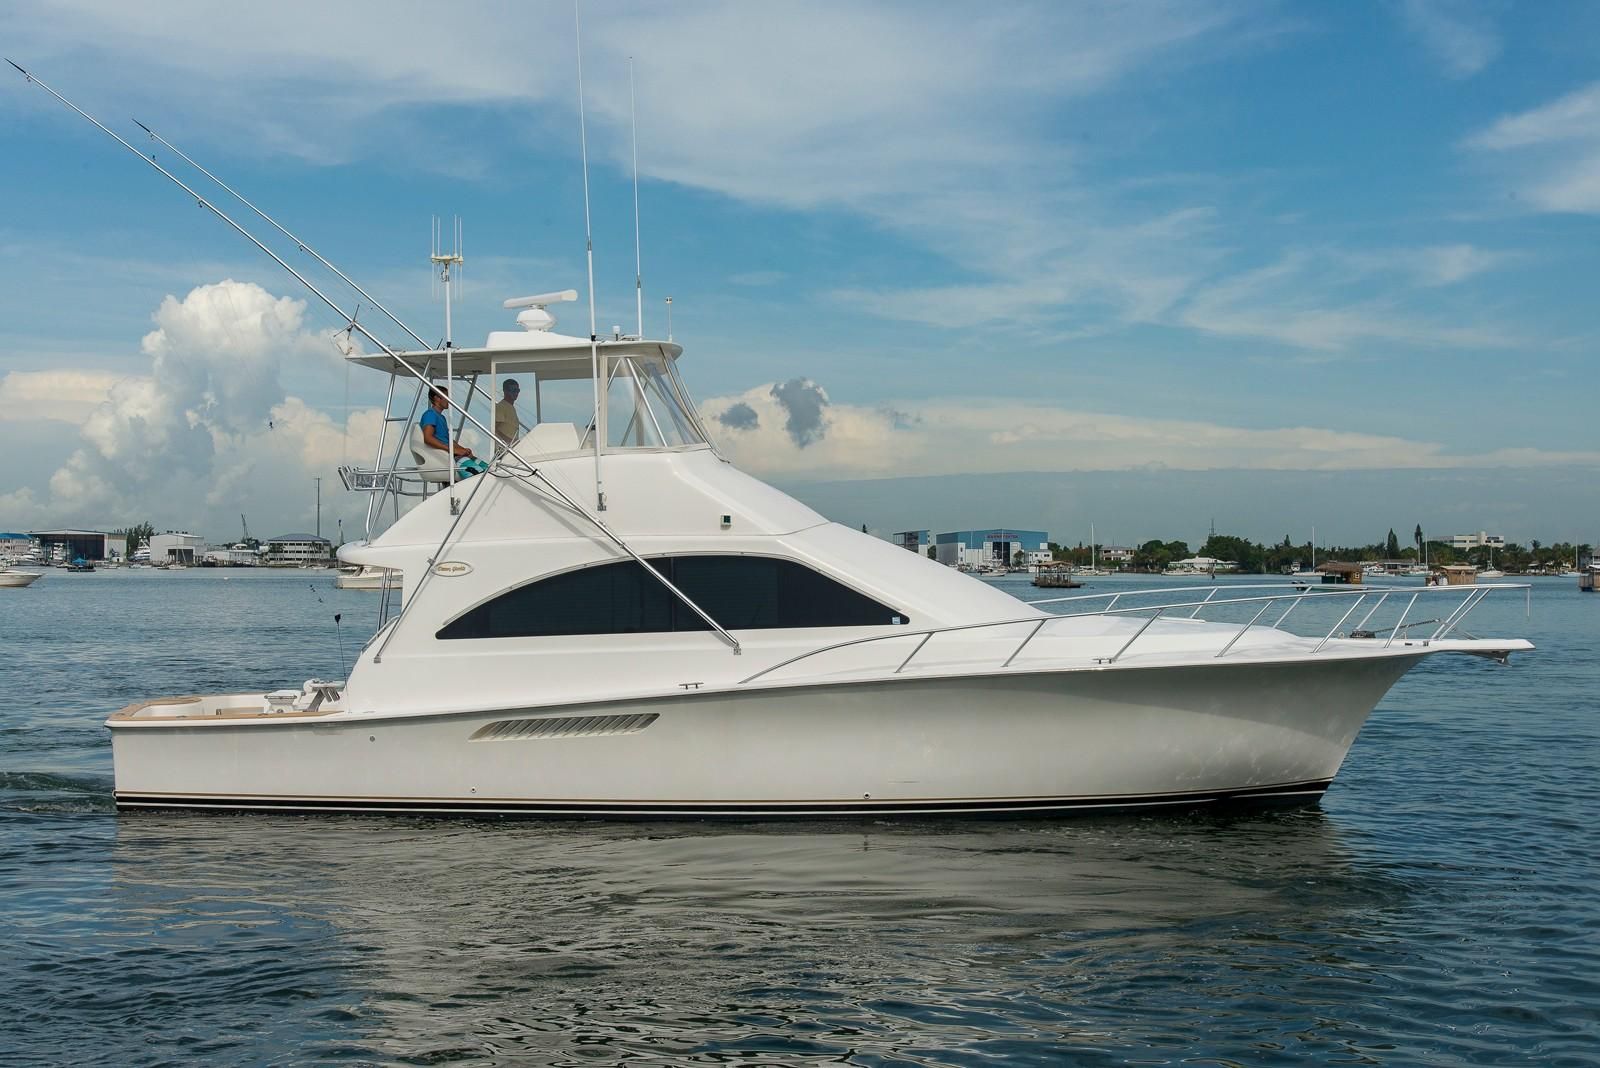 Yahts On 2005 Yachts Convertible Power Boat For Sale Www.